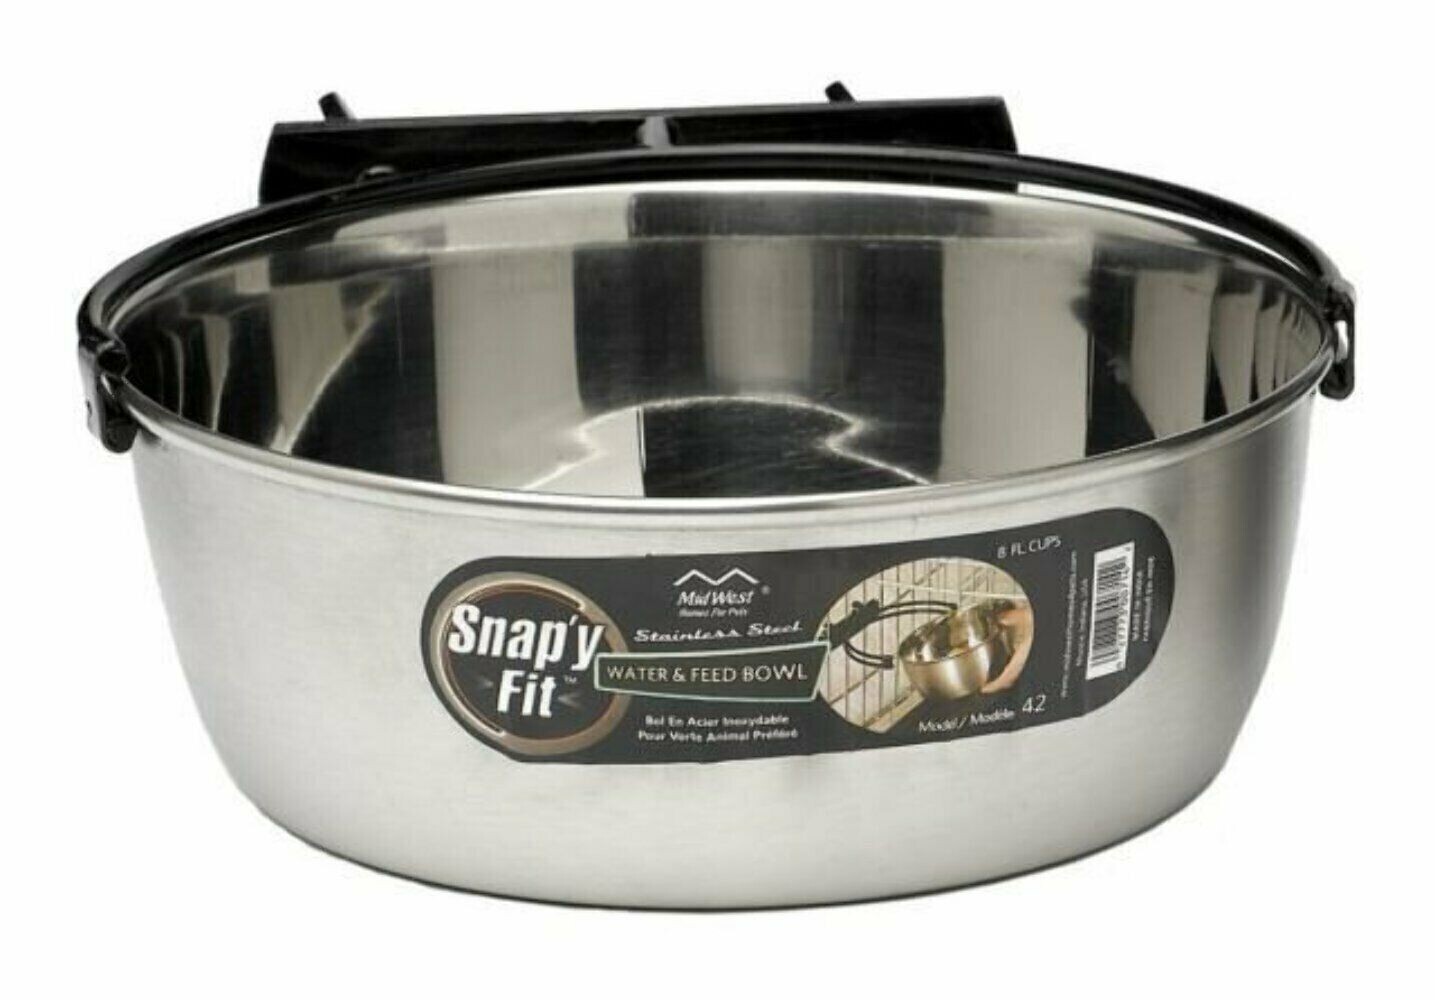 MidWest Snapy Fit Crate Bowl - 1900ml / 60fl/oz